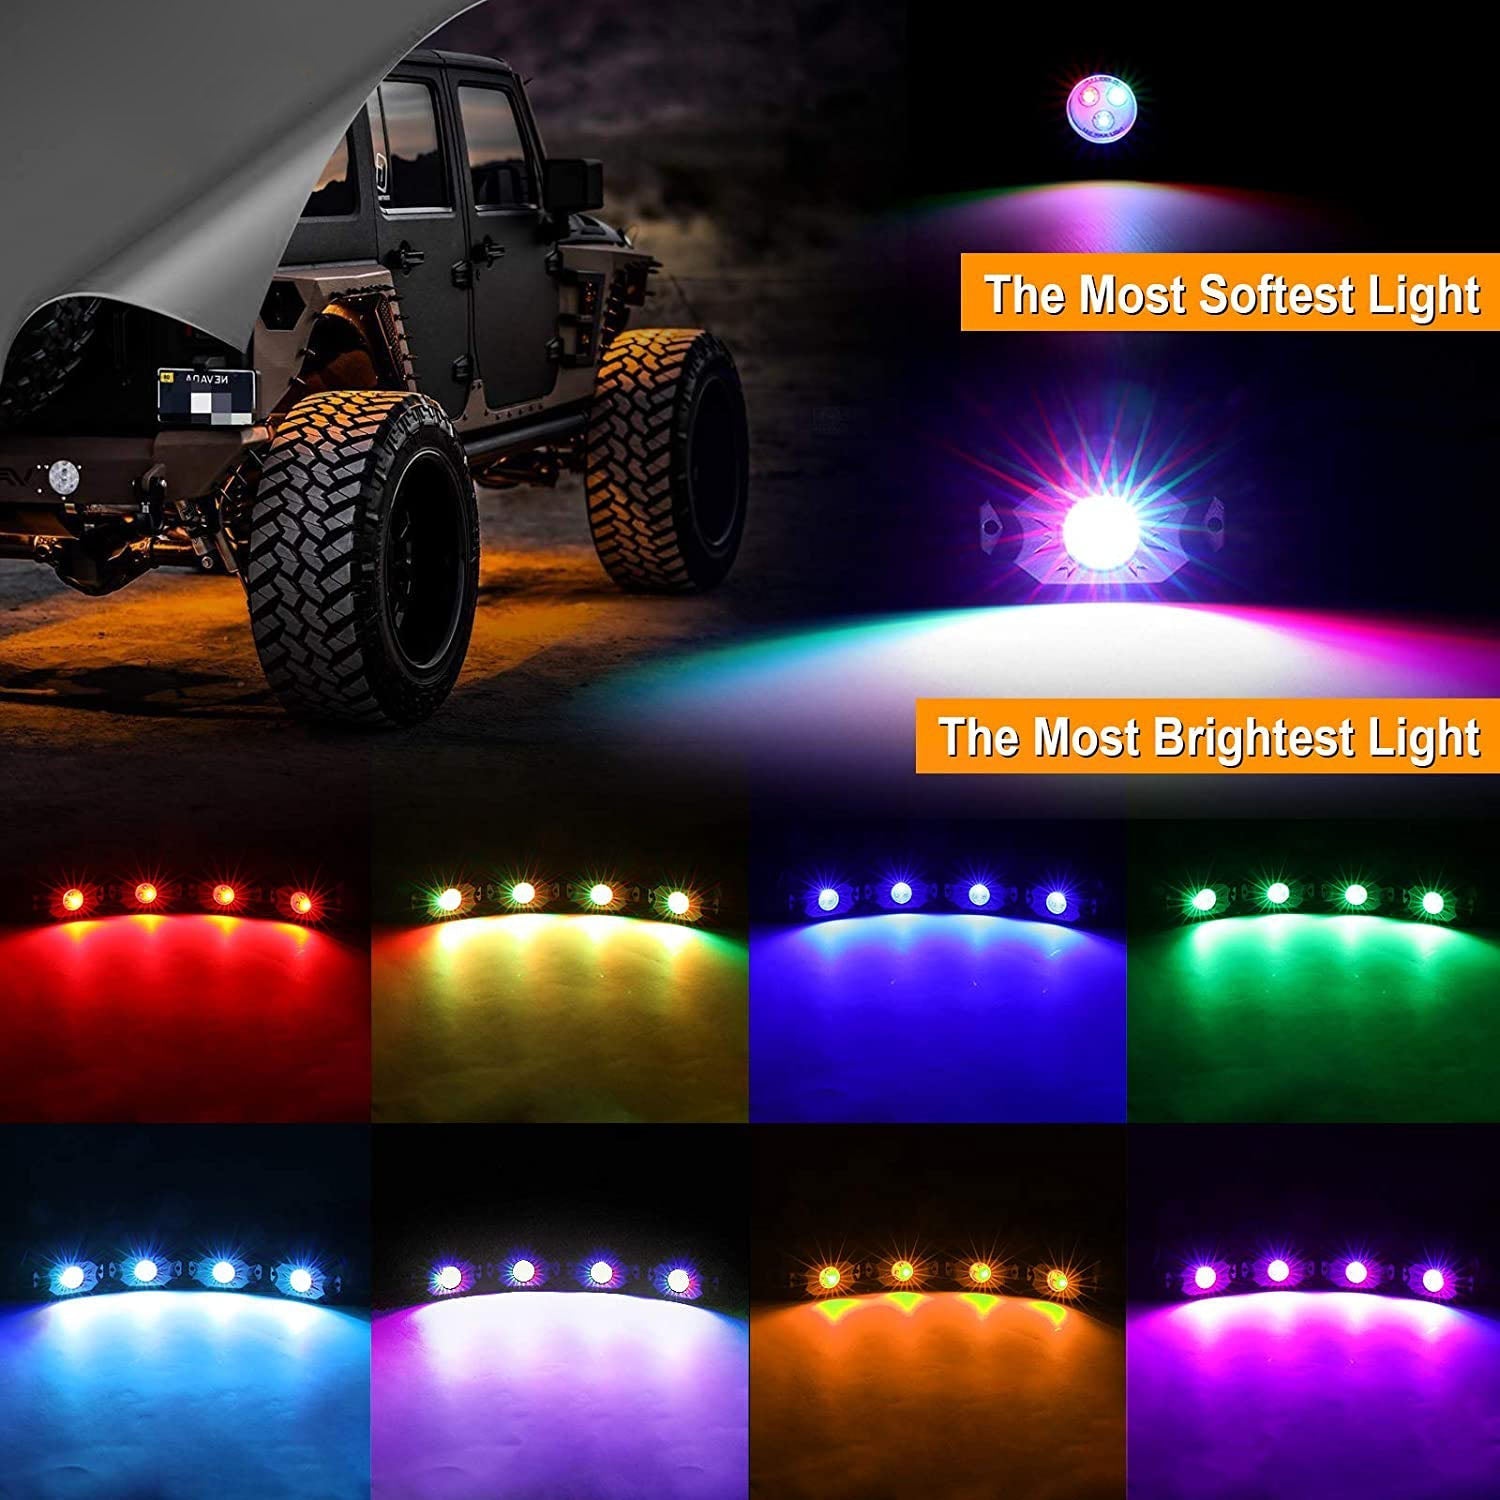 RGB LED Rock Light Set with Bluetooth Controller for GMC Sierra AT4 GMC Sierra 1500/2500/3500